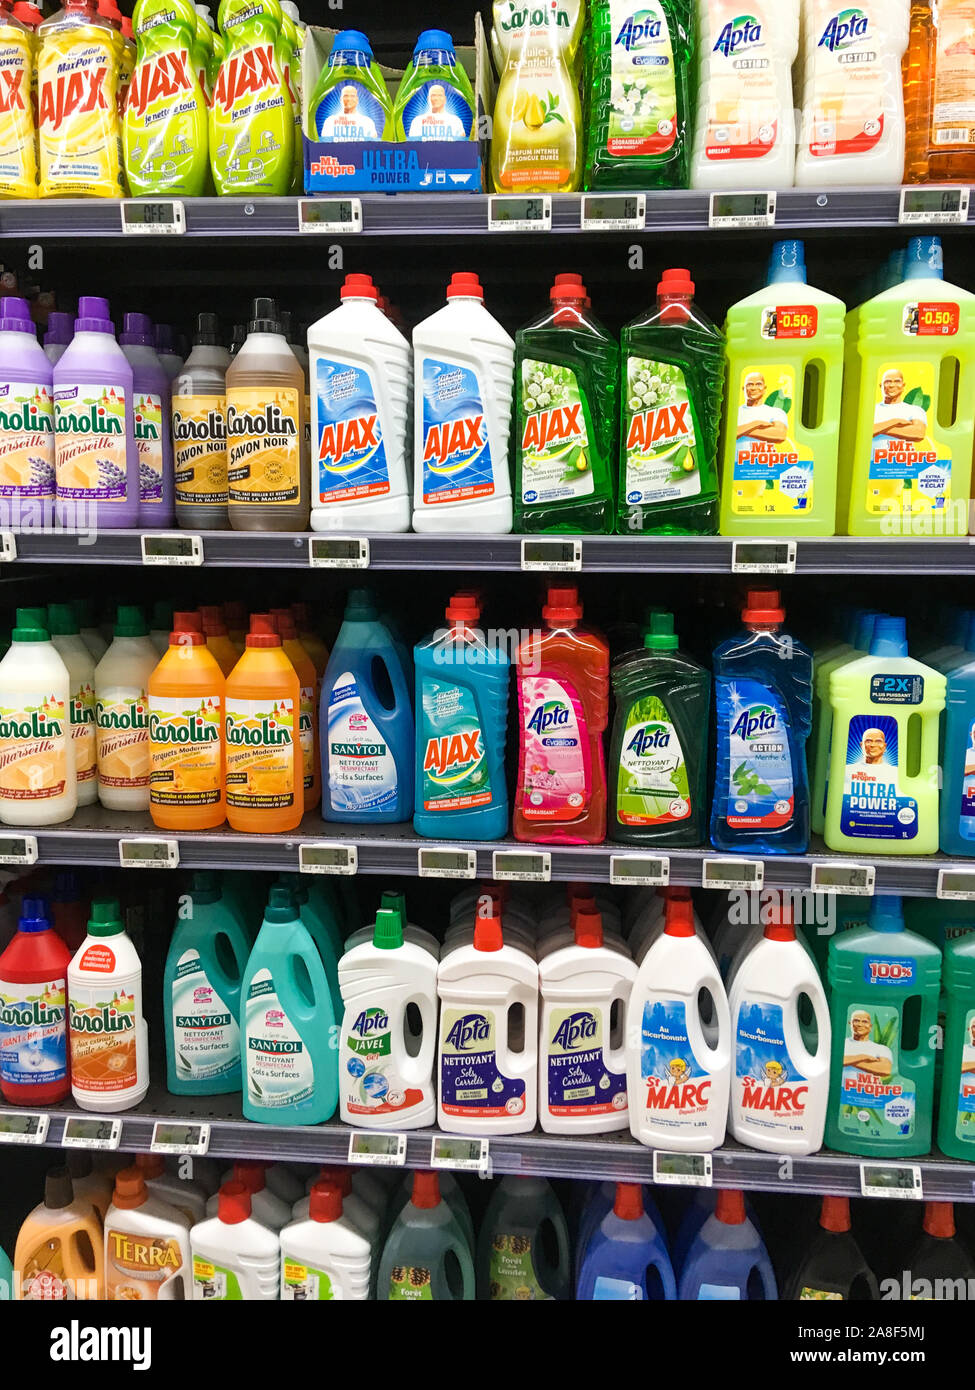 https://c8.alamy.com/comp/2A8F5MJ/hundreds-of-household-products-conditioned-in-plastic-bottles-lyon-france-2A8F5MJ.jpg